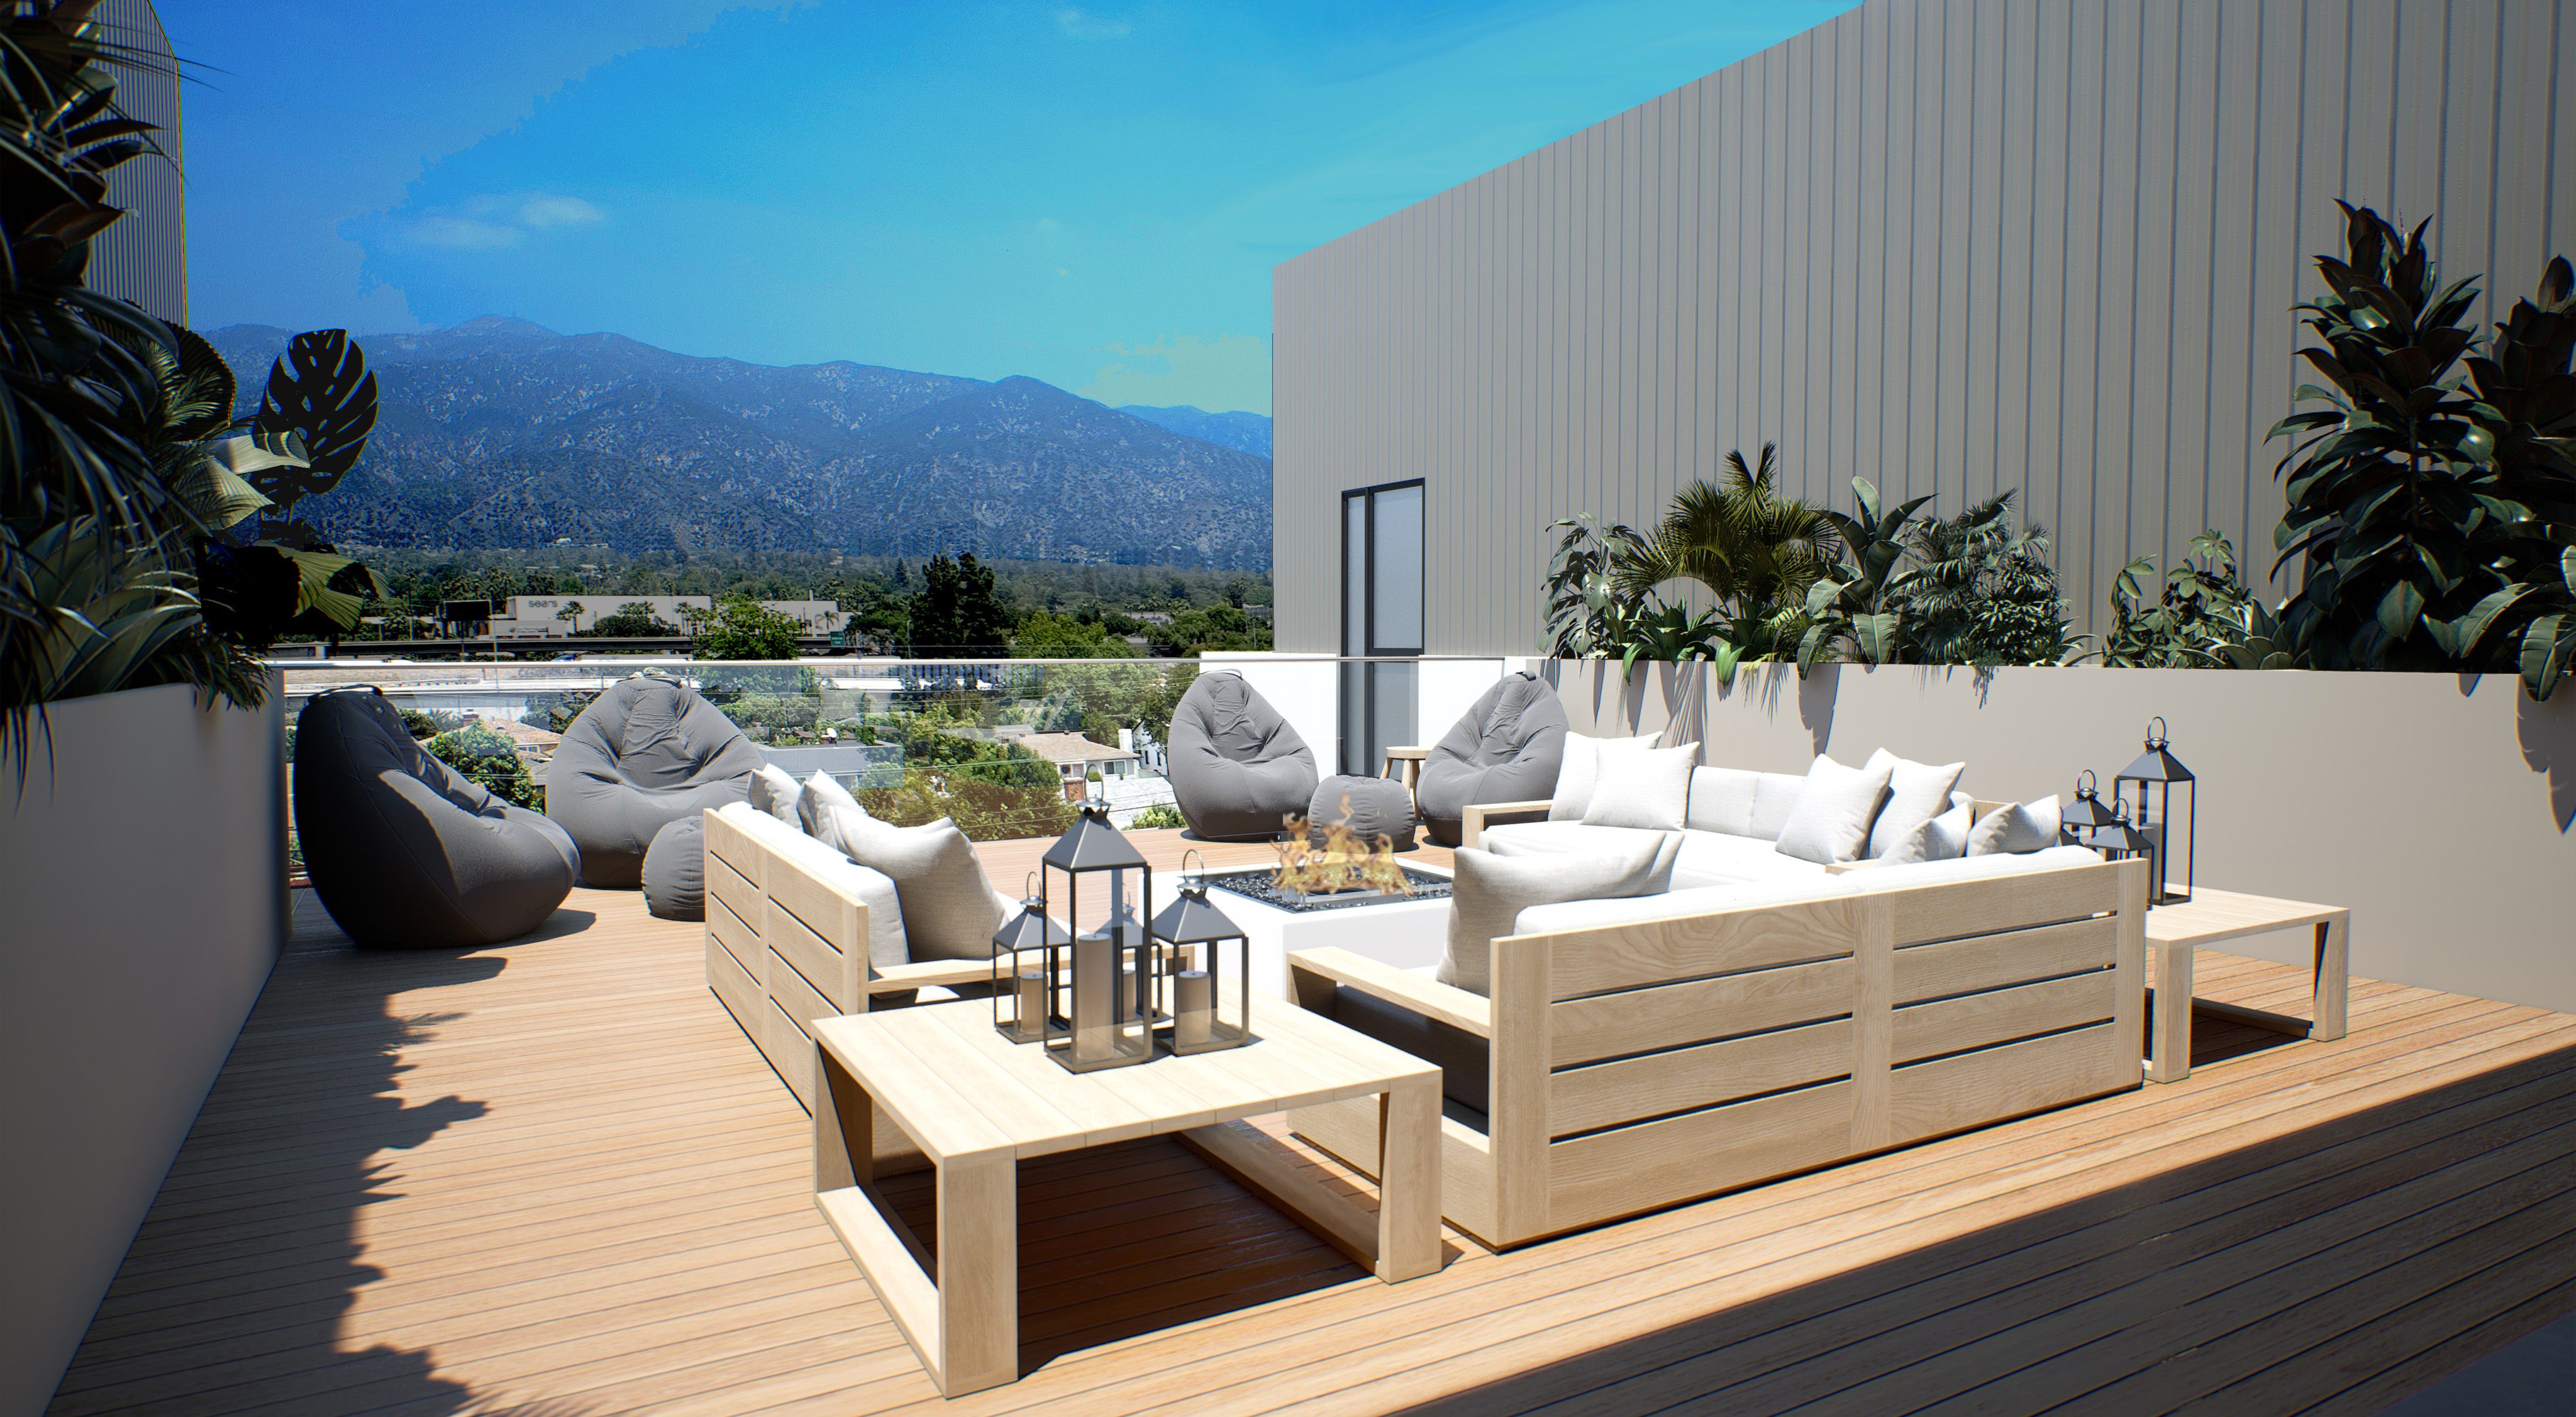 Outdoor patio with cream wooden couches, gray bean bag chairs, fire pit and views of the Pasadena hills